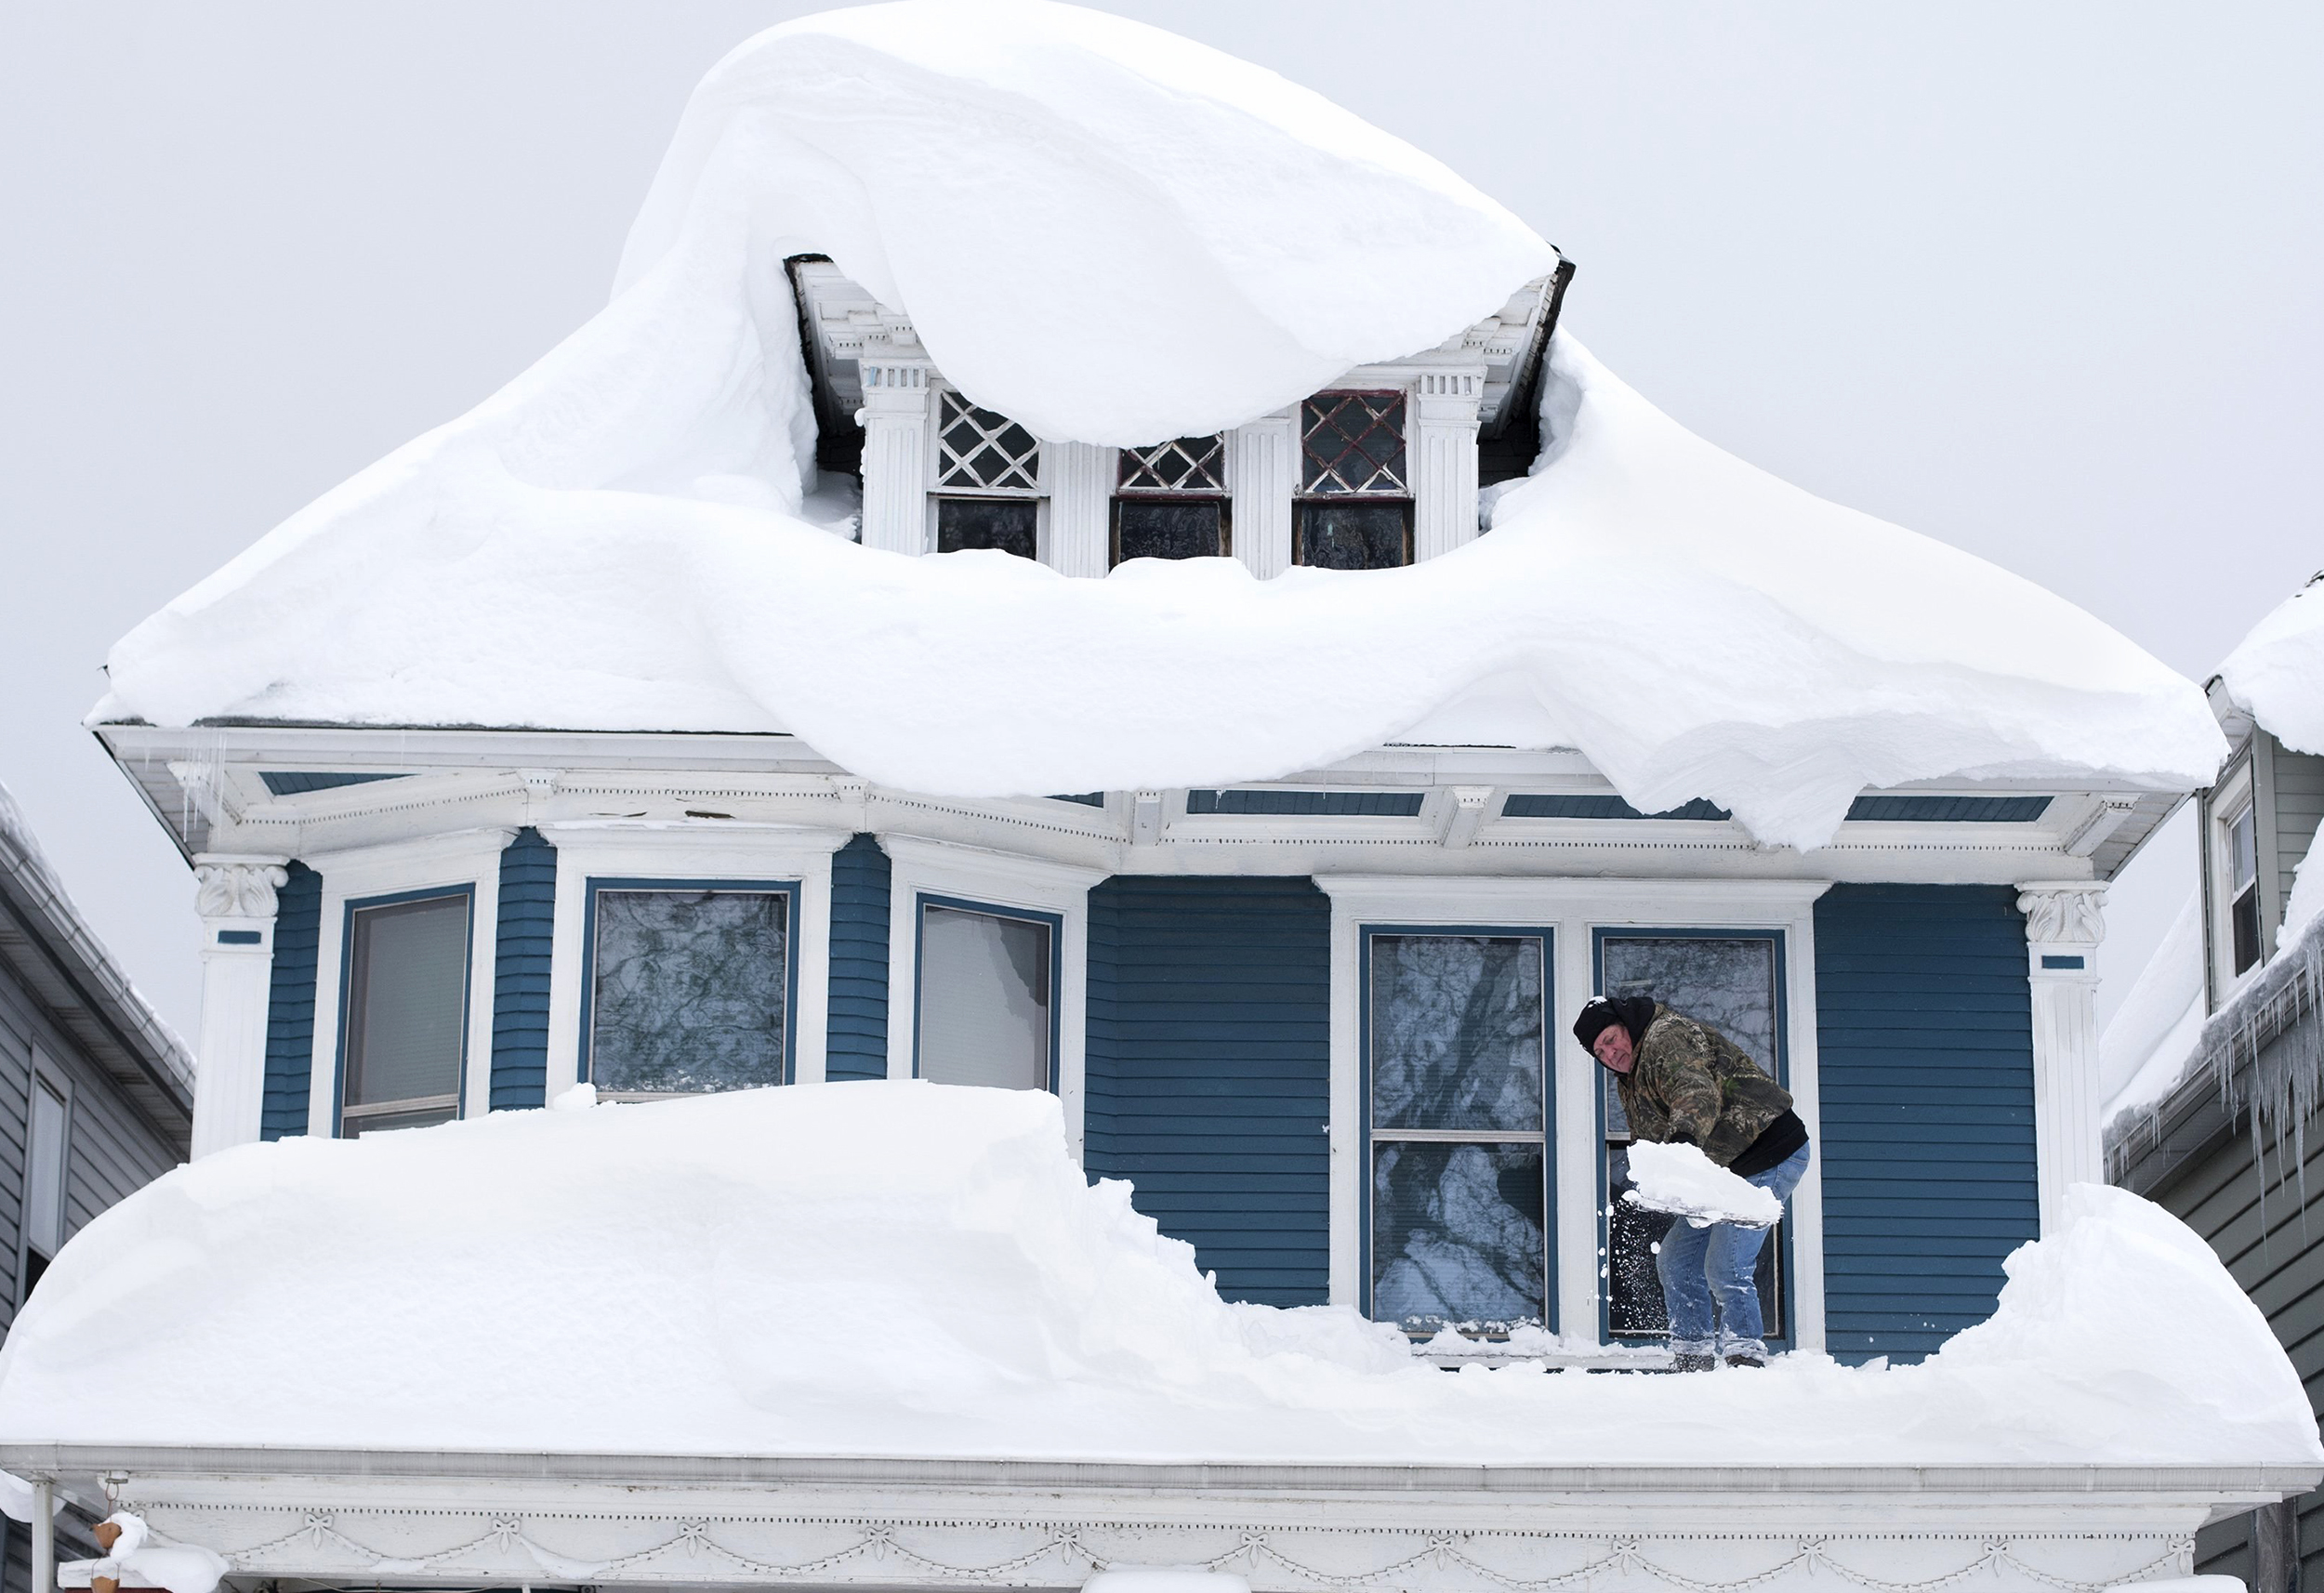 Buffalo Digs Out from Snow as Flooding, Roof Collapse Fears Loom.